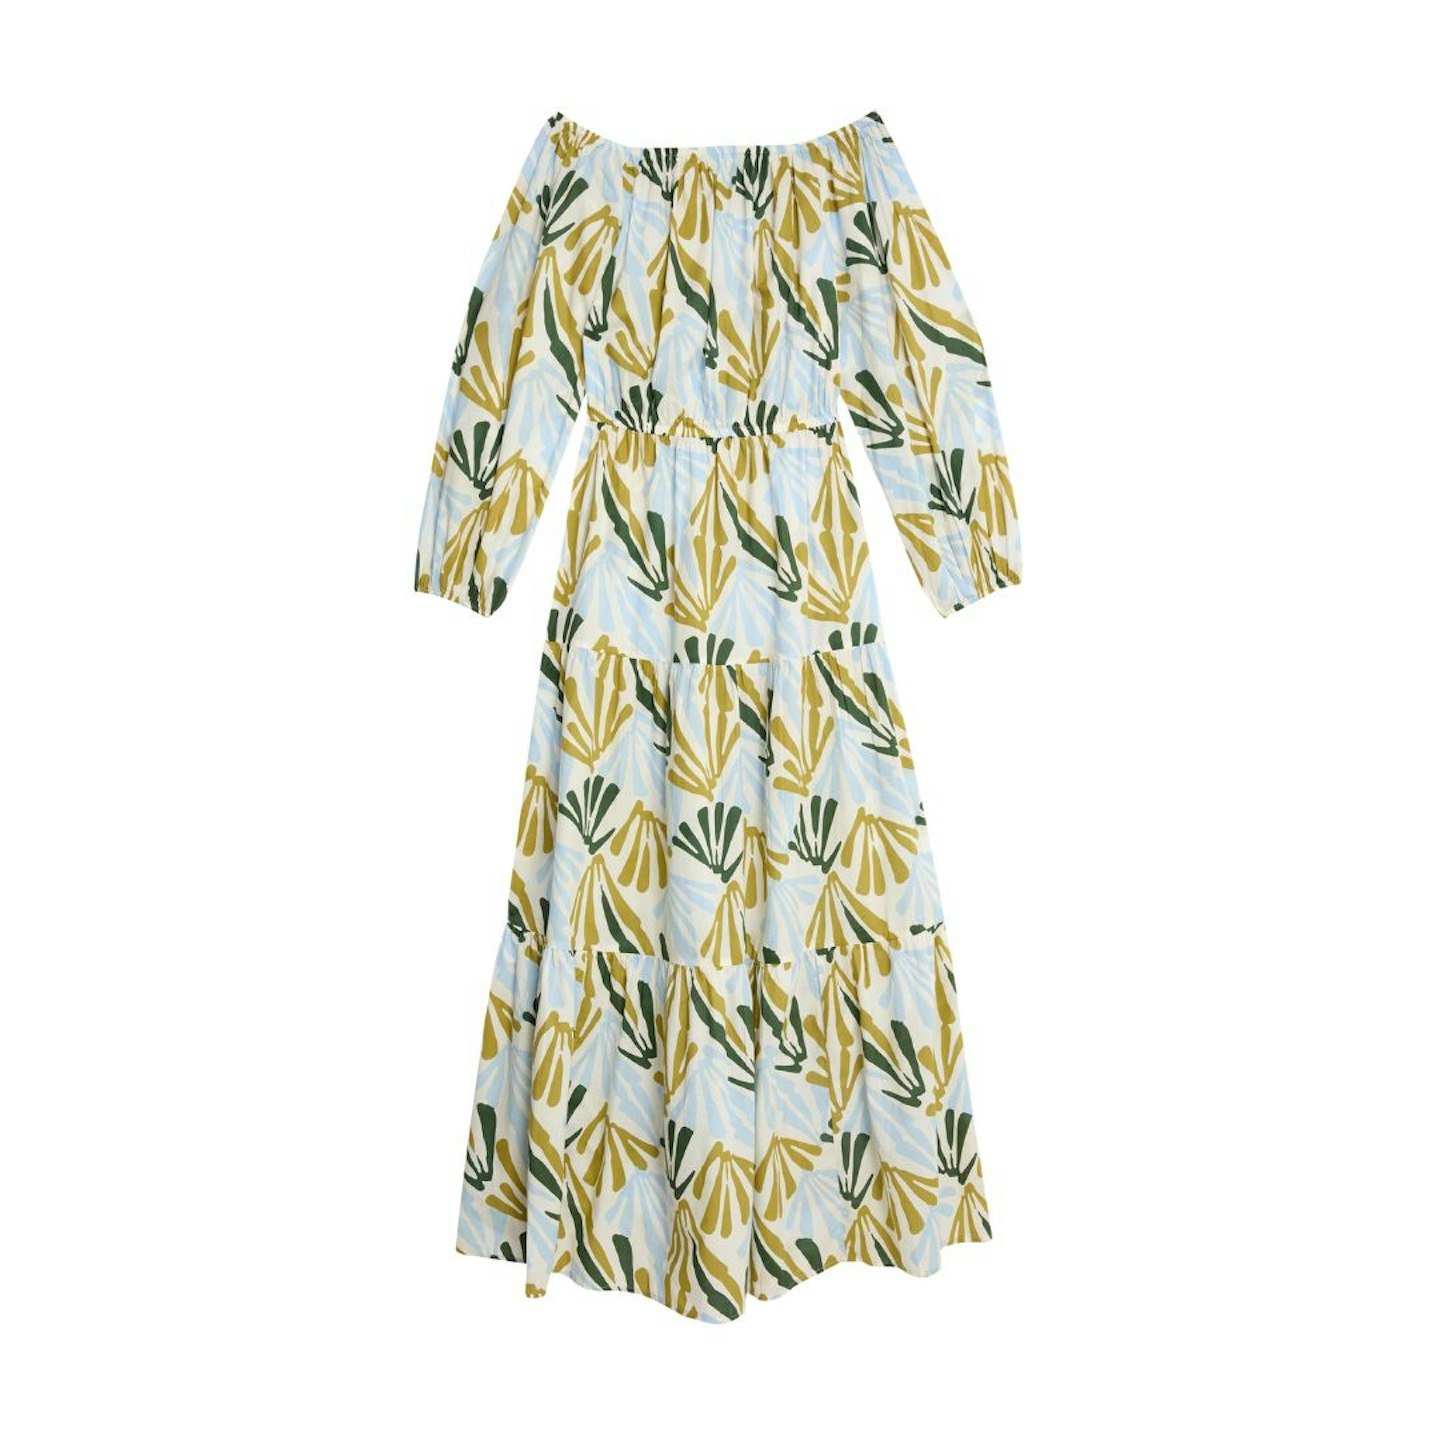 The best Marks and Spencer dresses: Pure Cotton Printed Bardot Midaxi Beach Dress